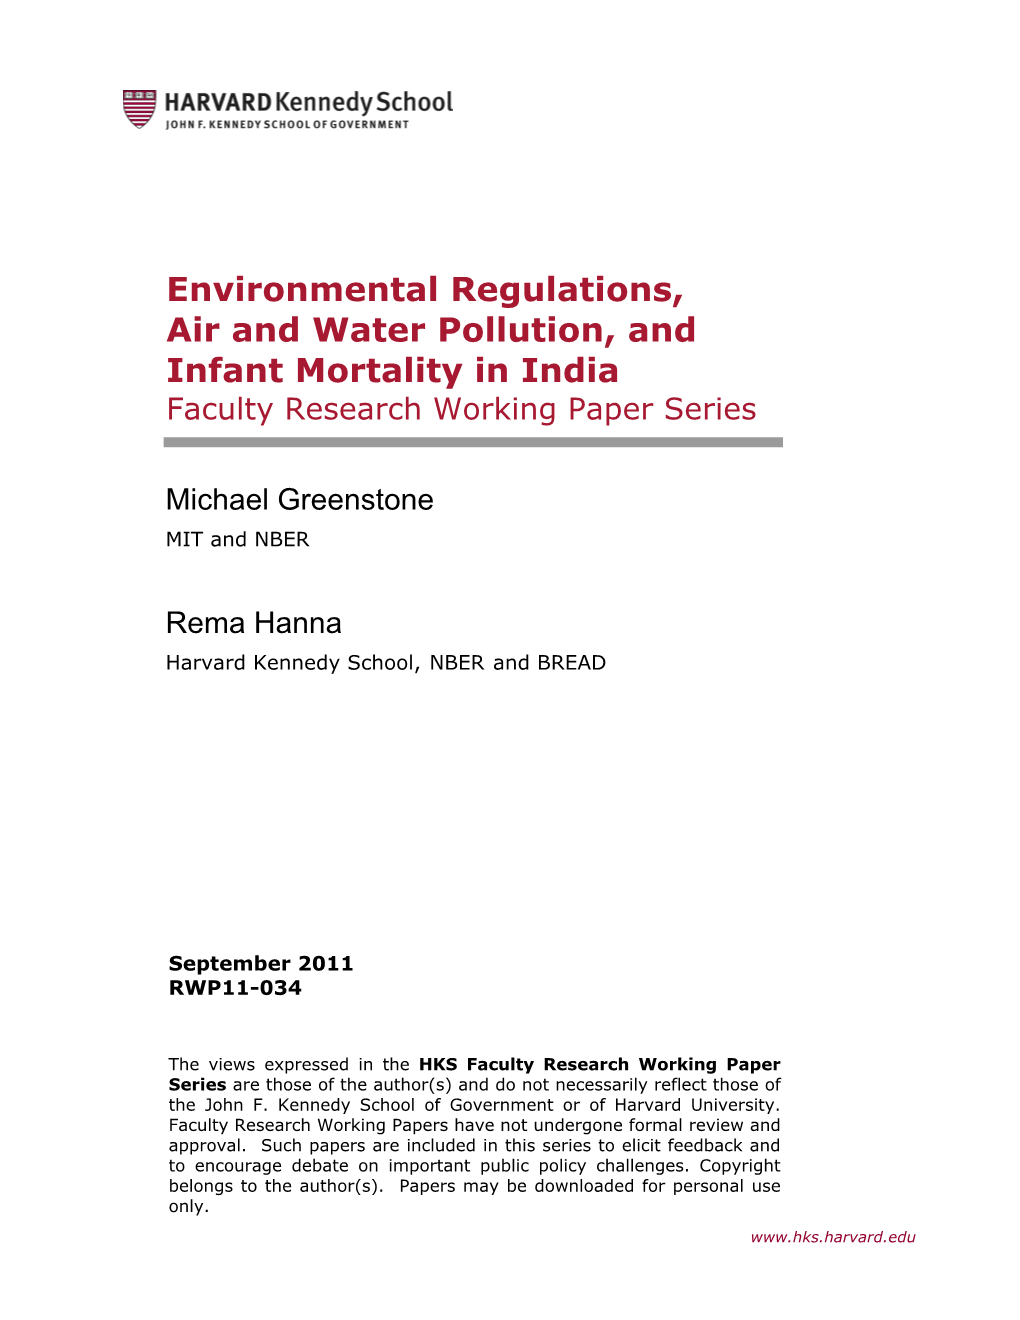 Environmental Regulations, Air and Water Pollution, and Infant Mortality in India Faculty Research Working Paper Series